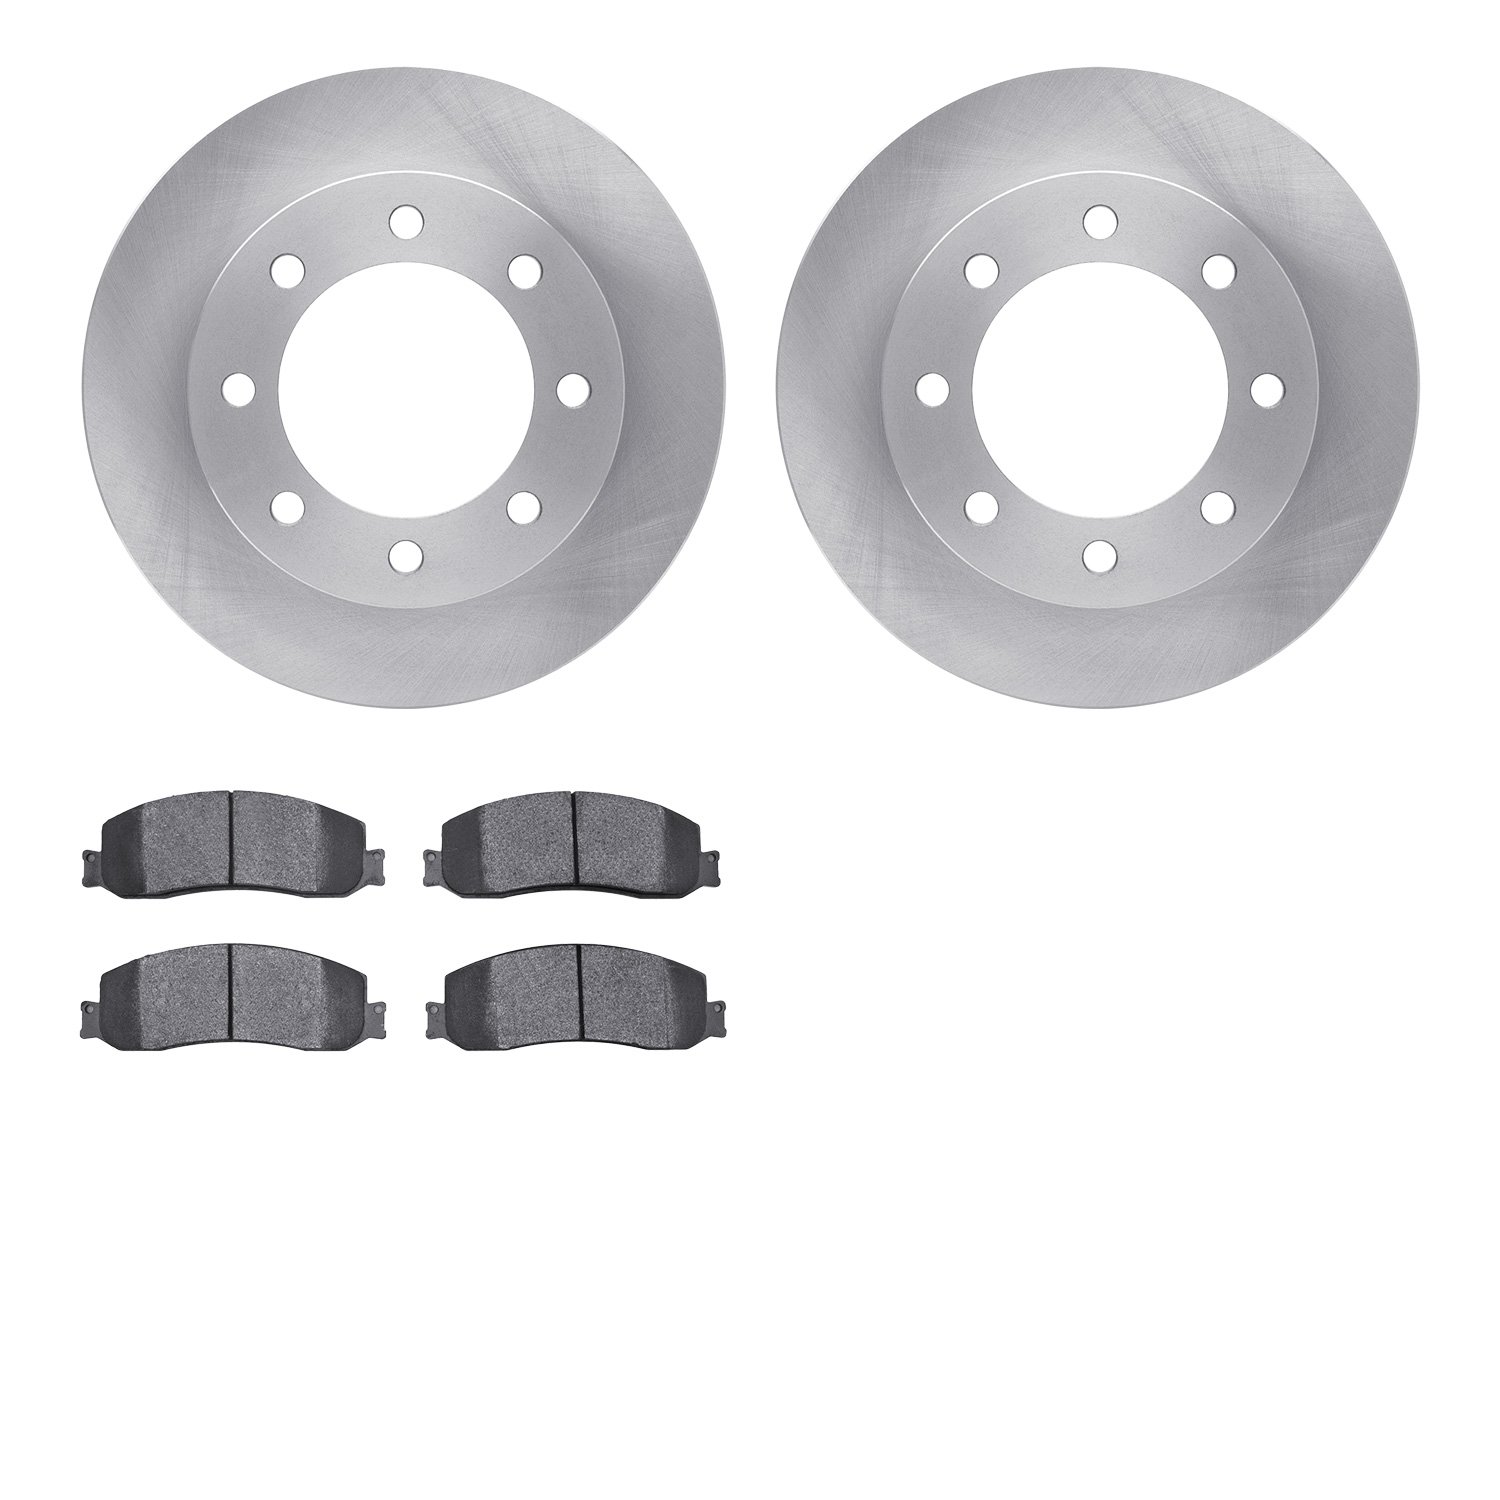 6402-54237 Brake Rotors with Ultimate-Duty Brake Pads, 2010-2012 Ford/Lincoln/Mercury/Mazda, Position: Front